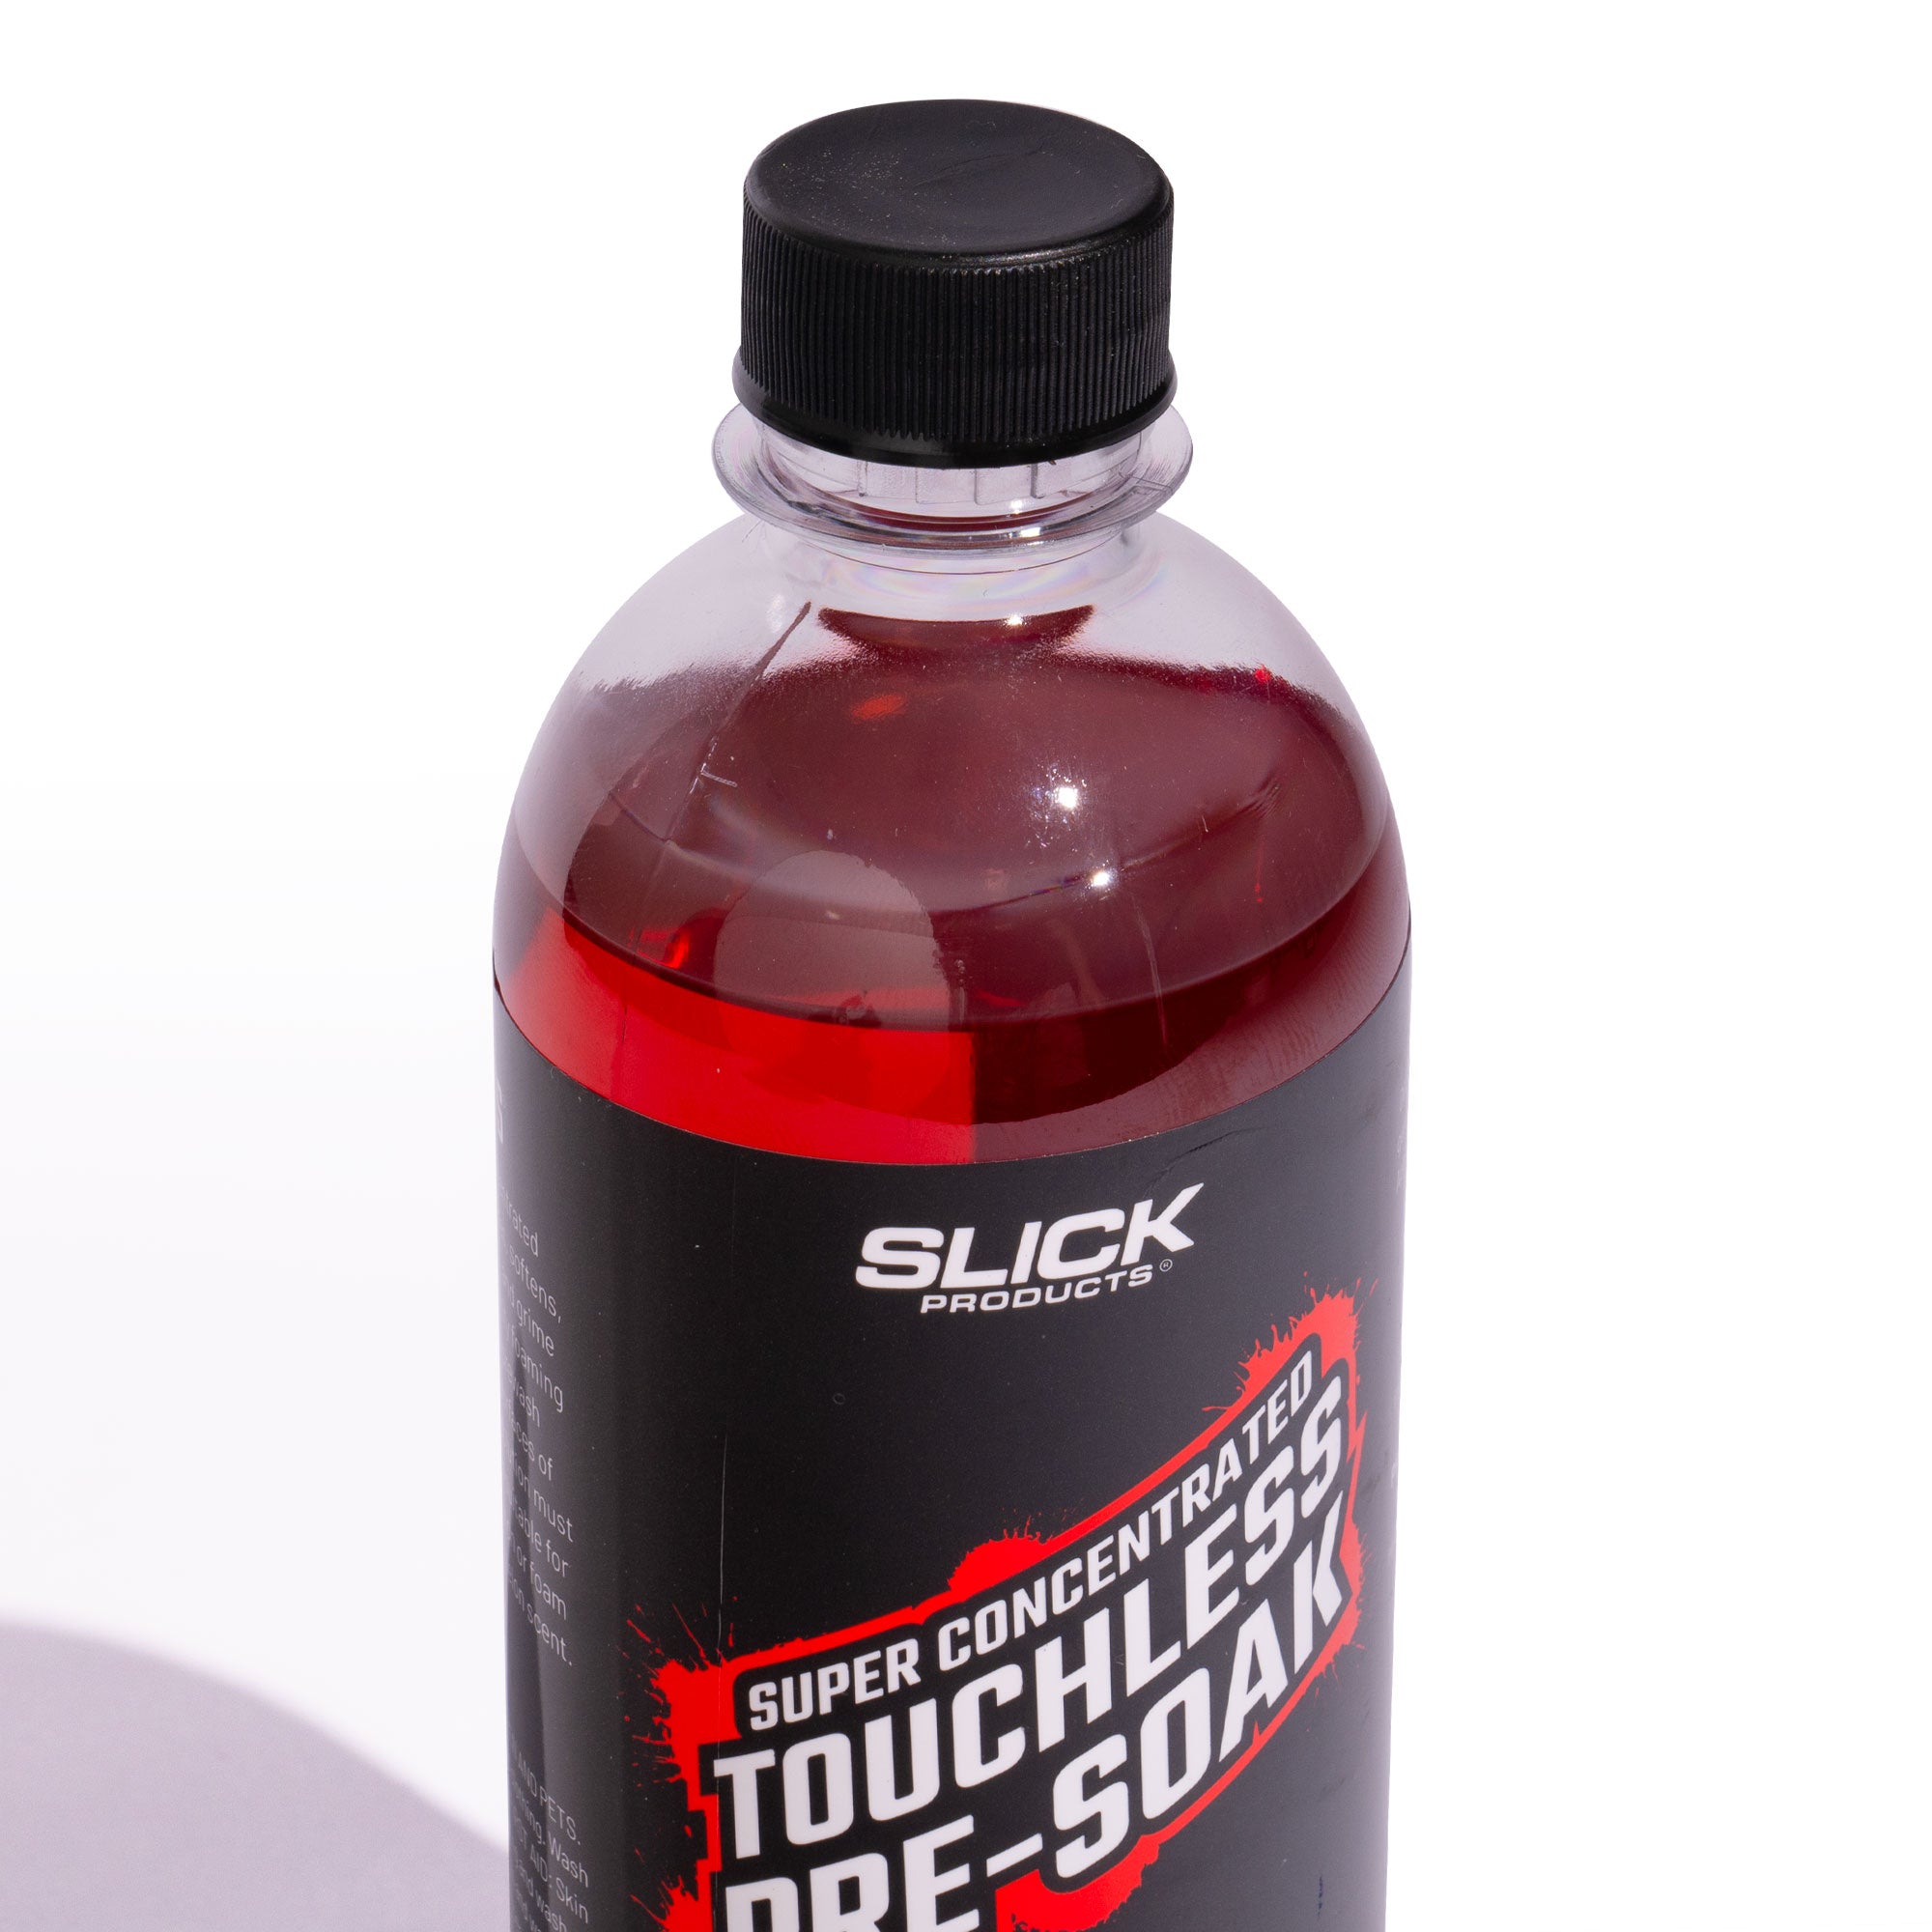 Super Concentrated Touchless Pre-Soak